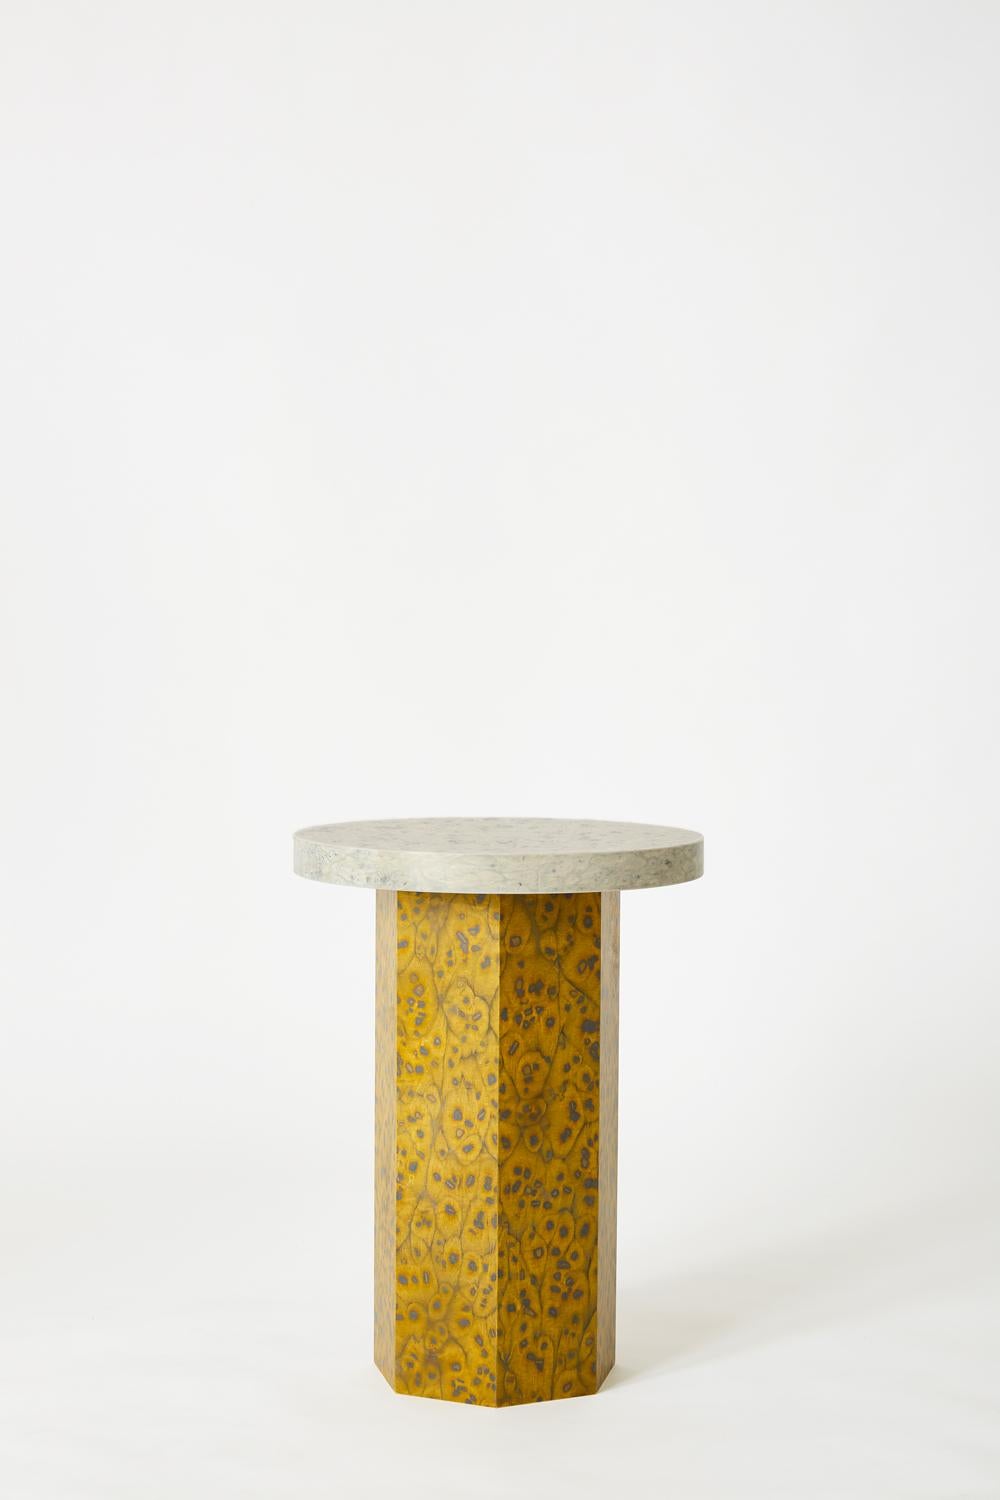 Round Bold Osis Septagon base side table by Llot Llov
Dimensions: Ø 40 x H 54
Materials: core board birch
Also available in round slim, rectangle slim, rectangle bold.

With OSIS Edition 5 LLOT LLOV is deepening the understanding of the impact